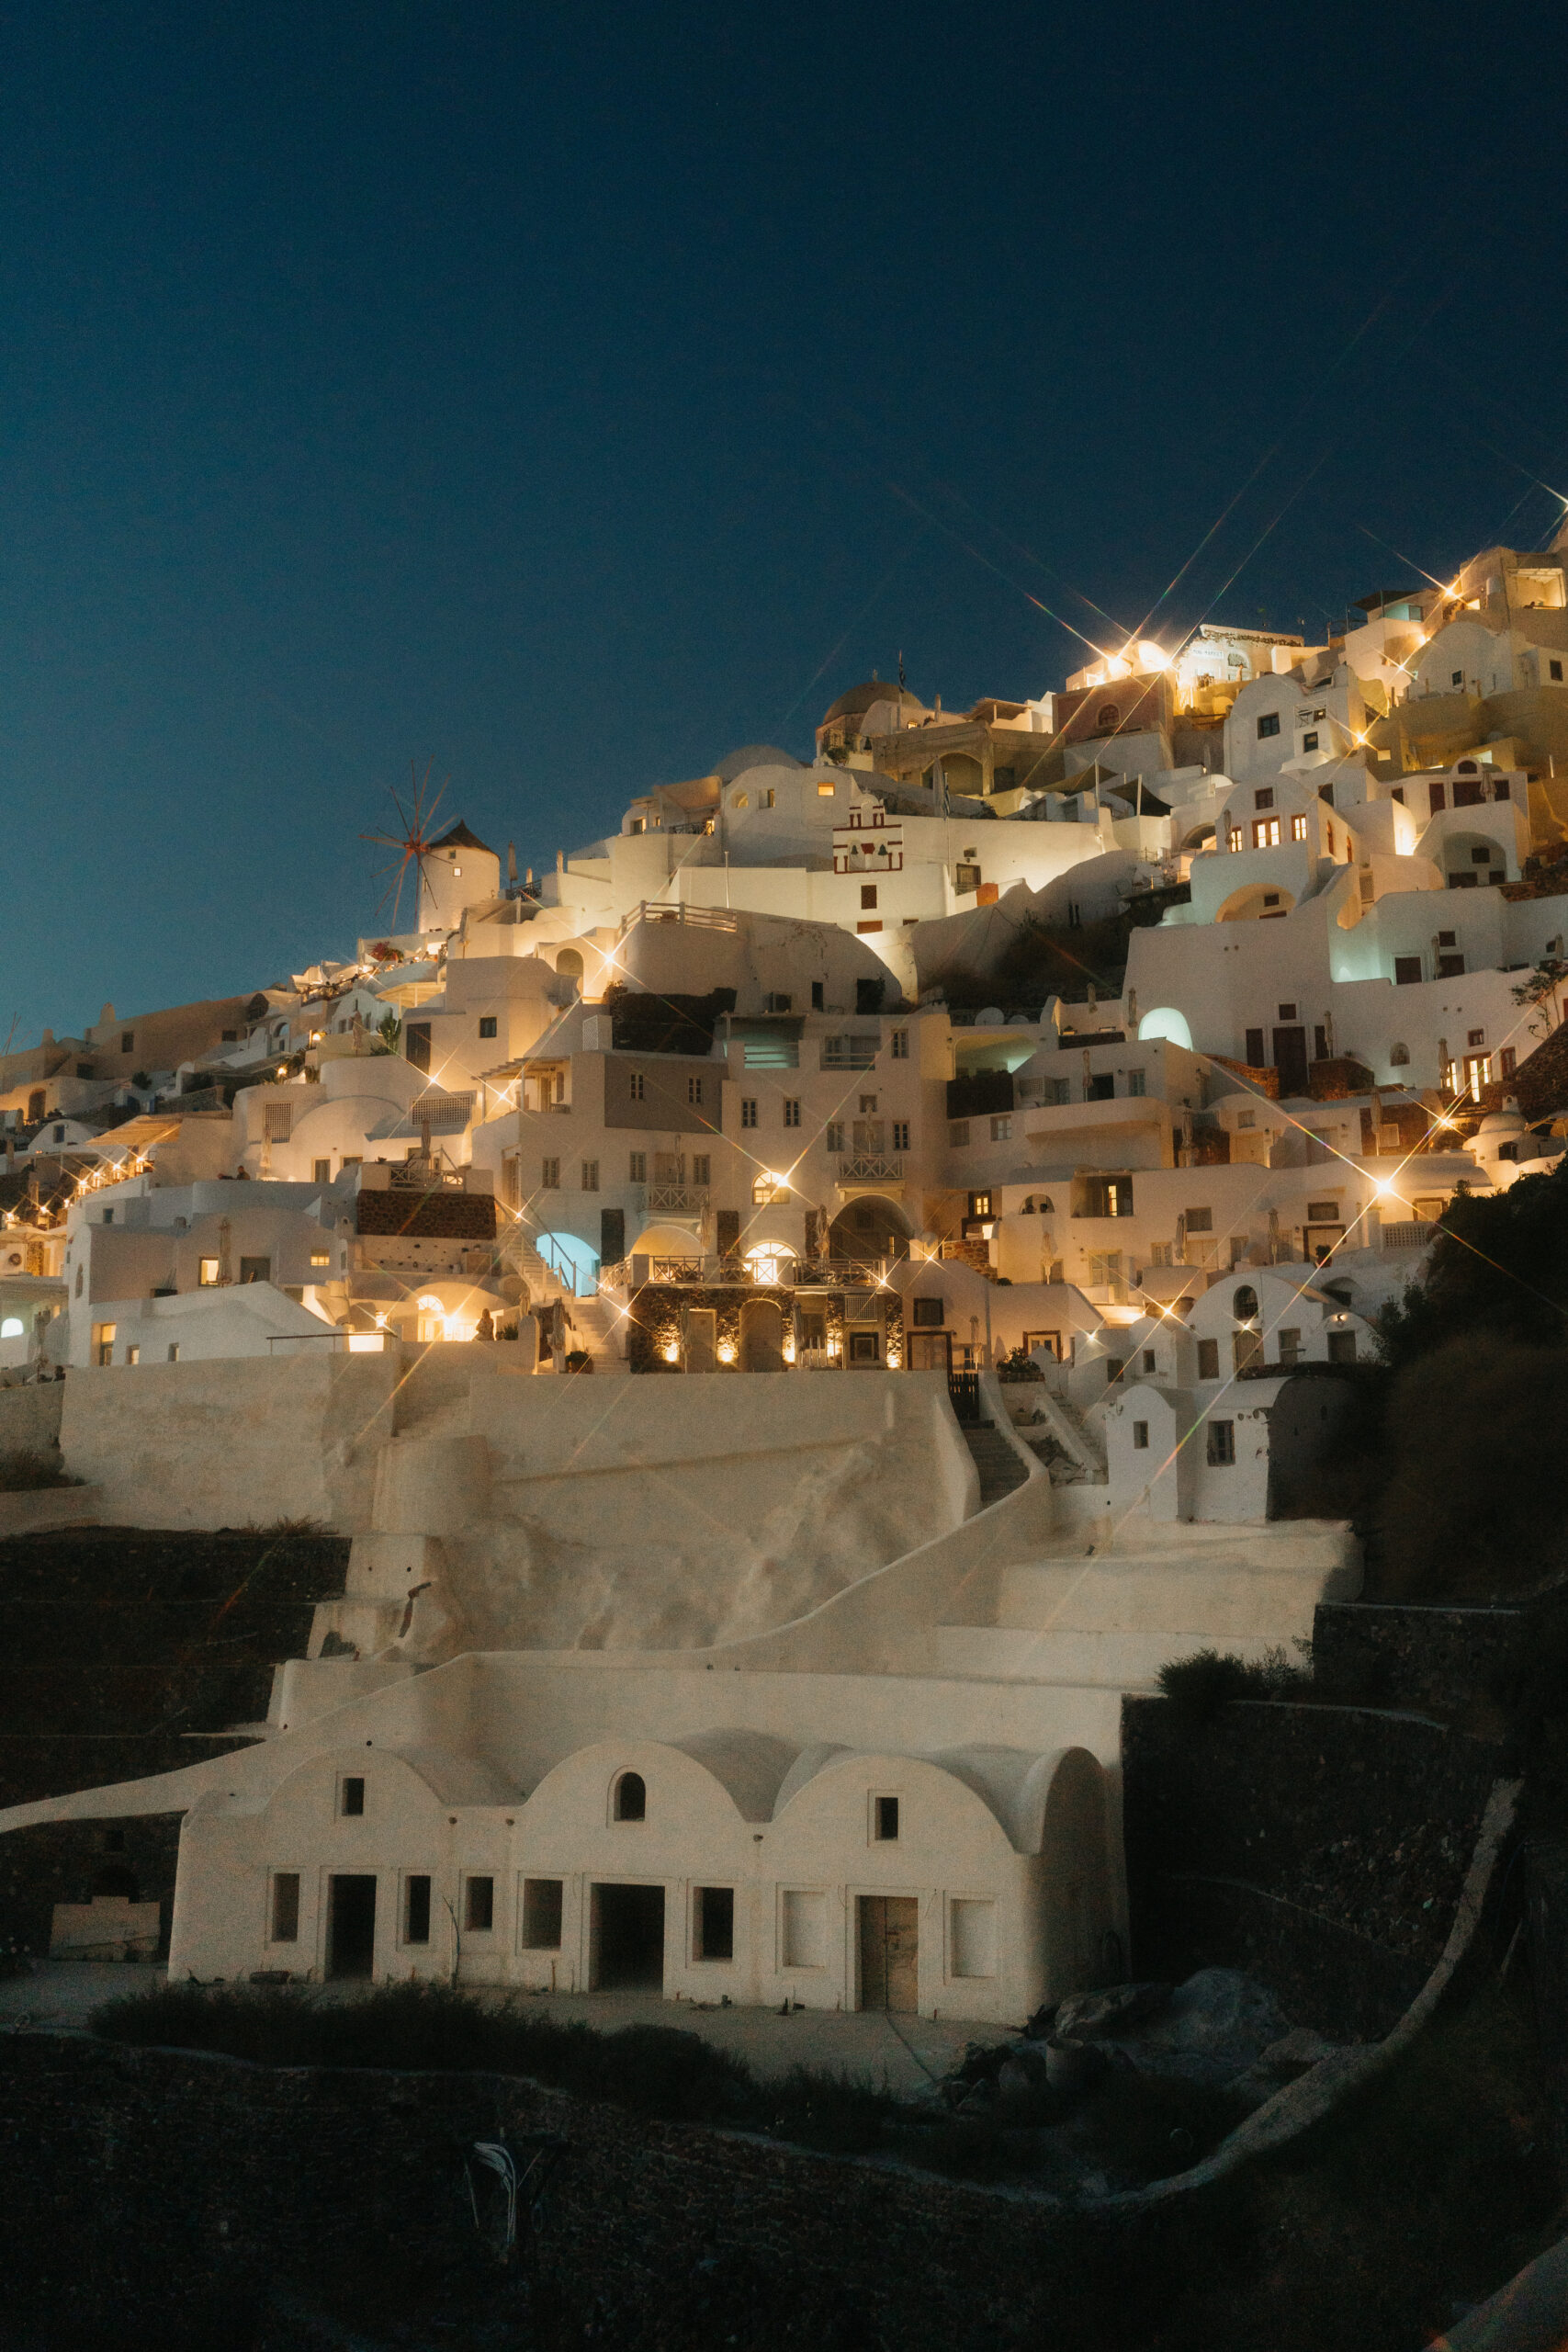 Twilight view of the whitewashed buildings of santorini, greece, with illuminated windows and winding stairs.